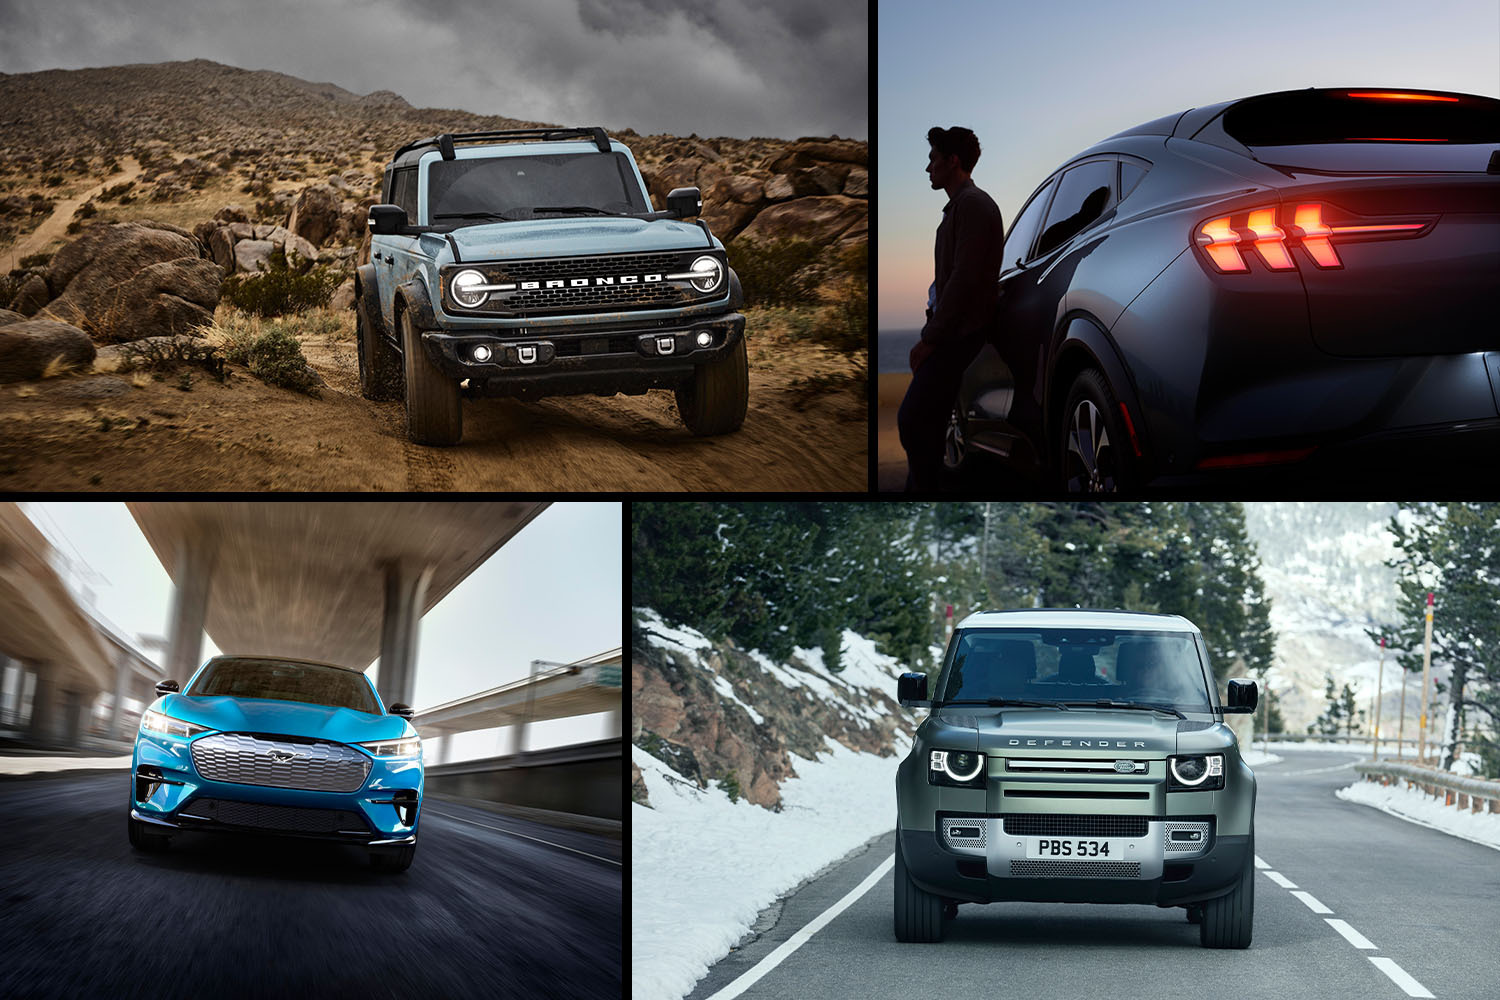 The 2021 Ford Bronco, 2021 Mustang Mach-E SUV and 2020 Land Rover Defender